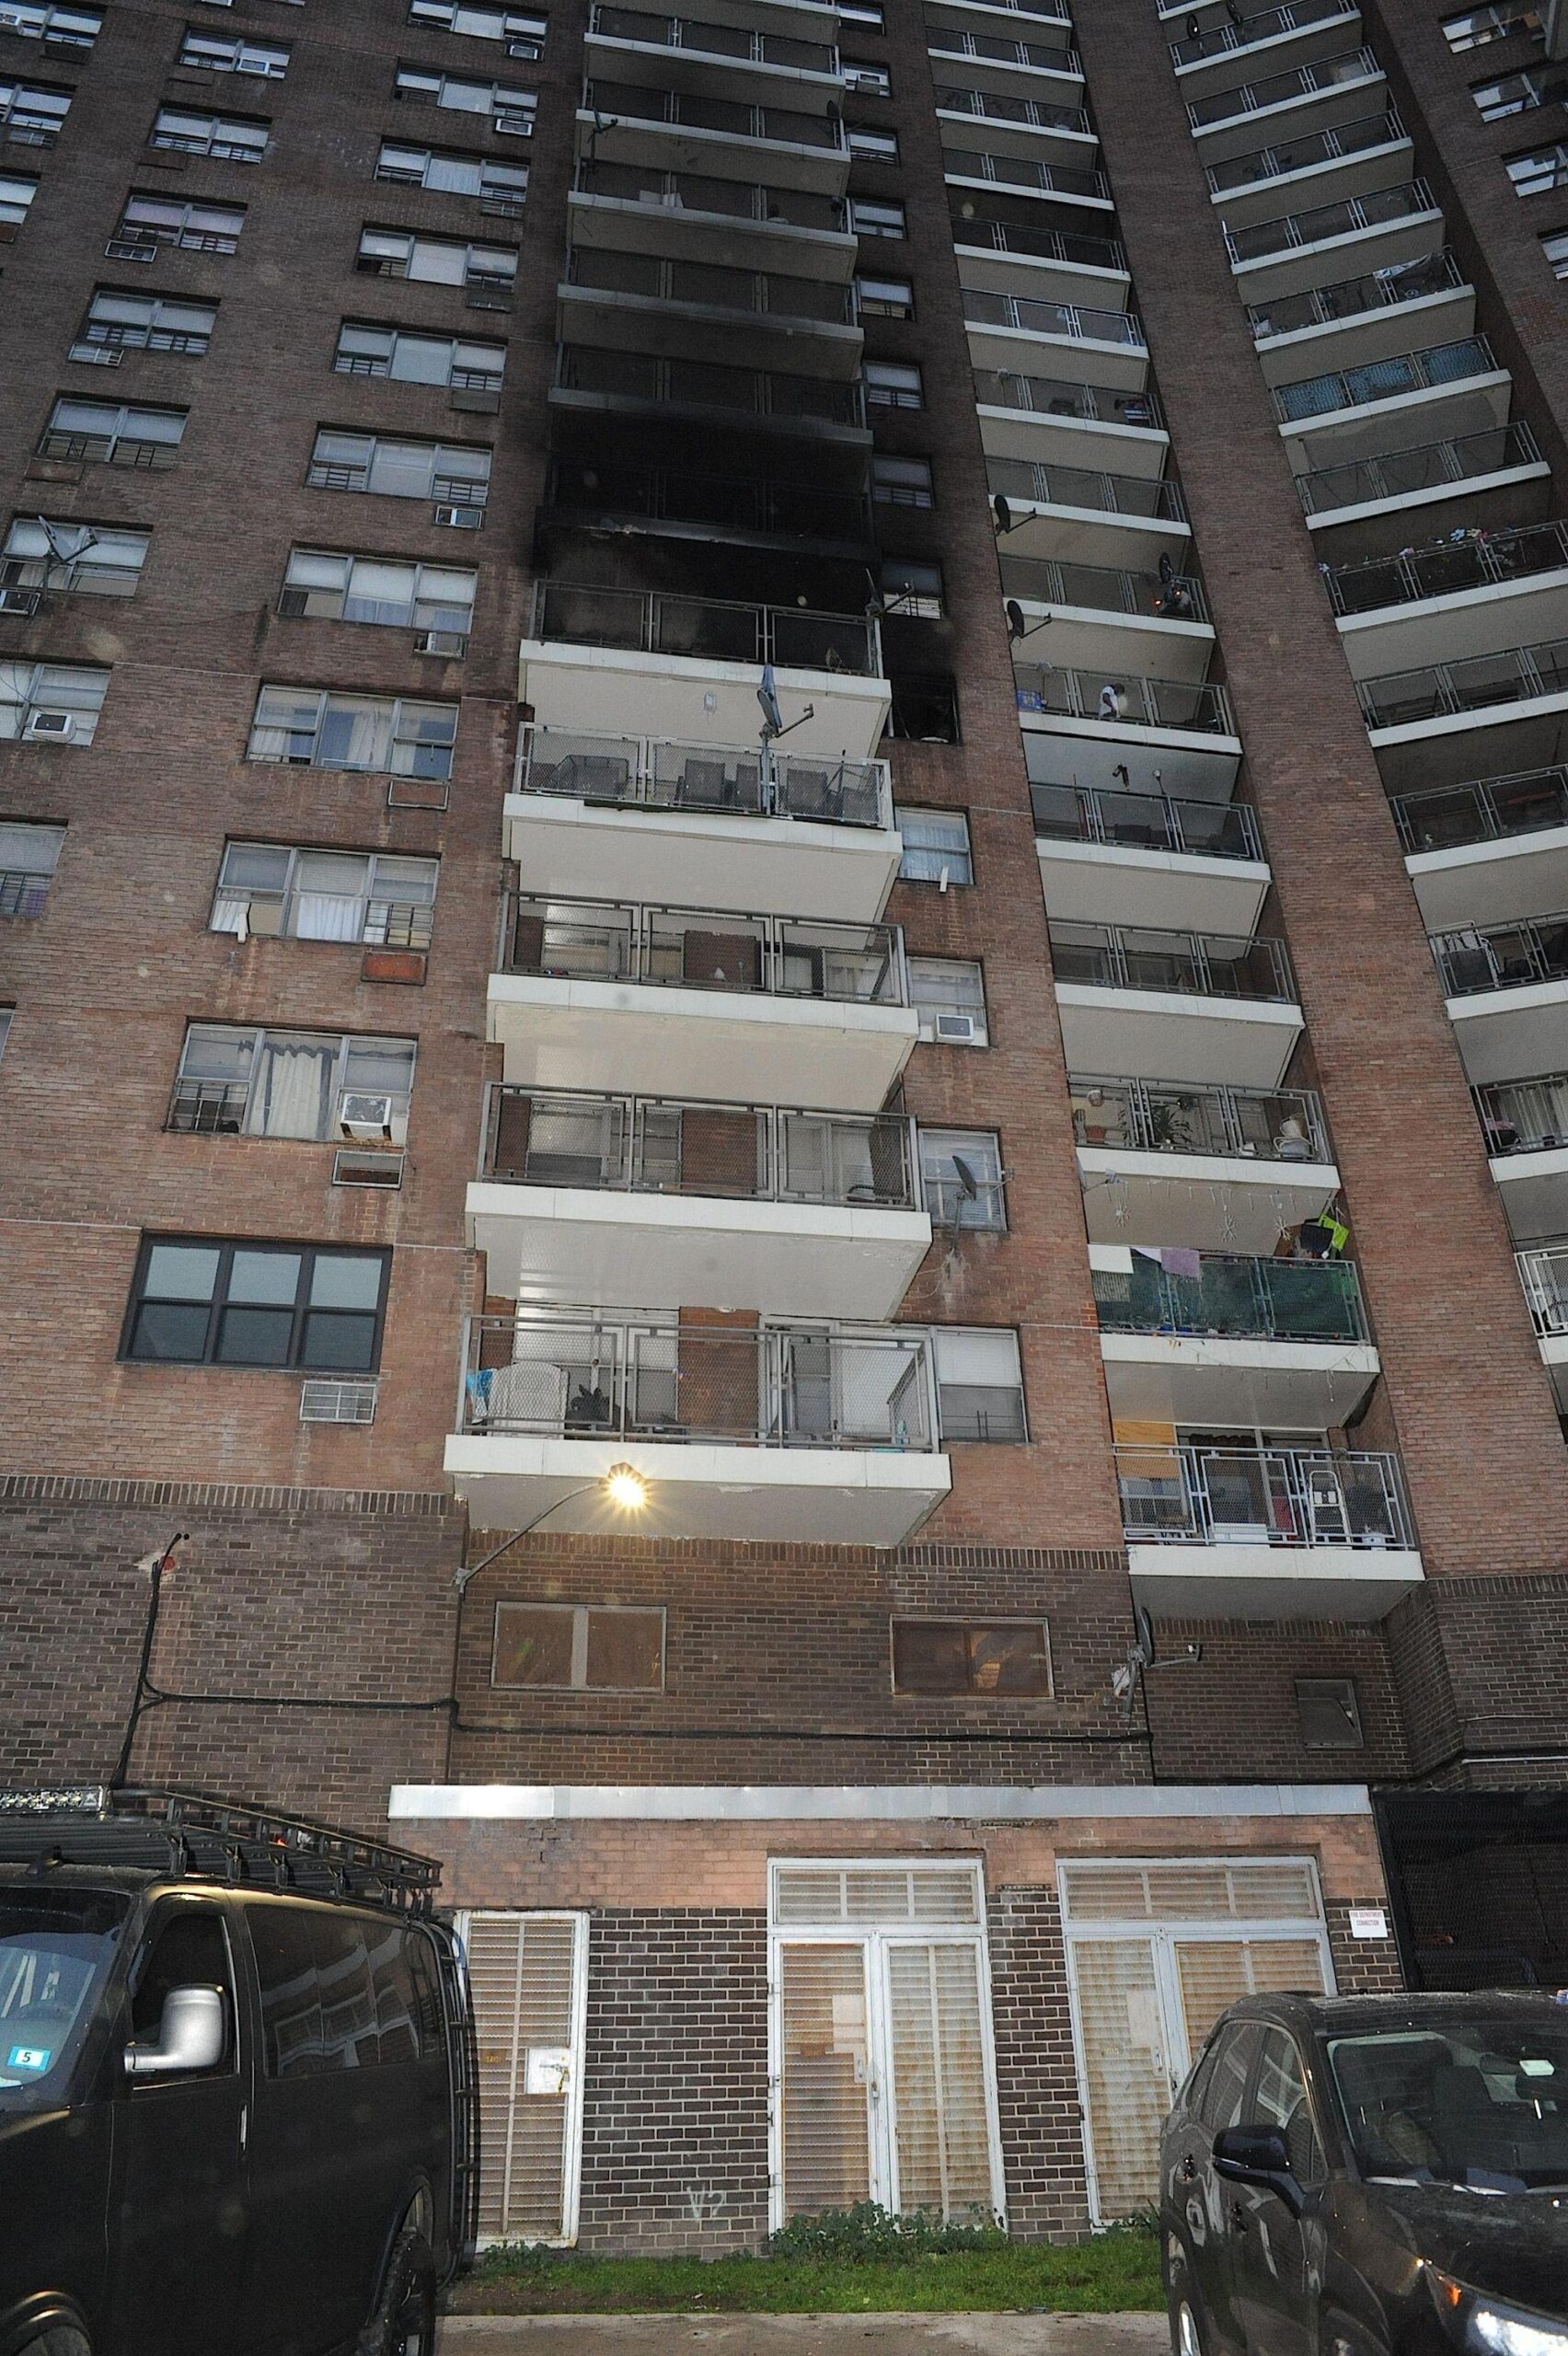 8-year-old Bronx girl recovering after six-story jump from balcony of burning apartment